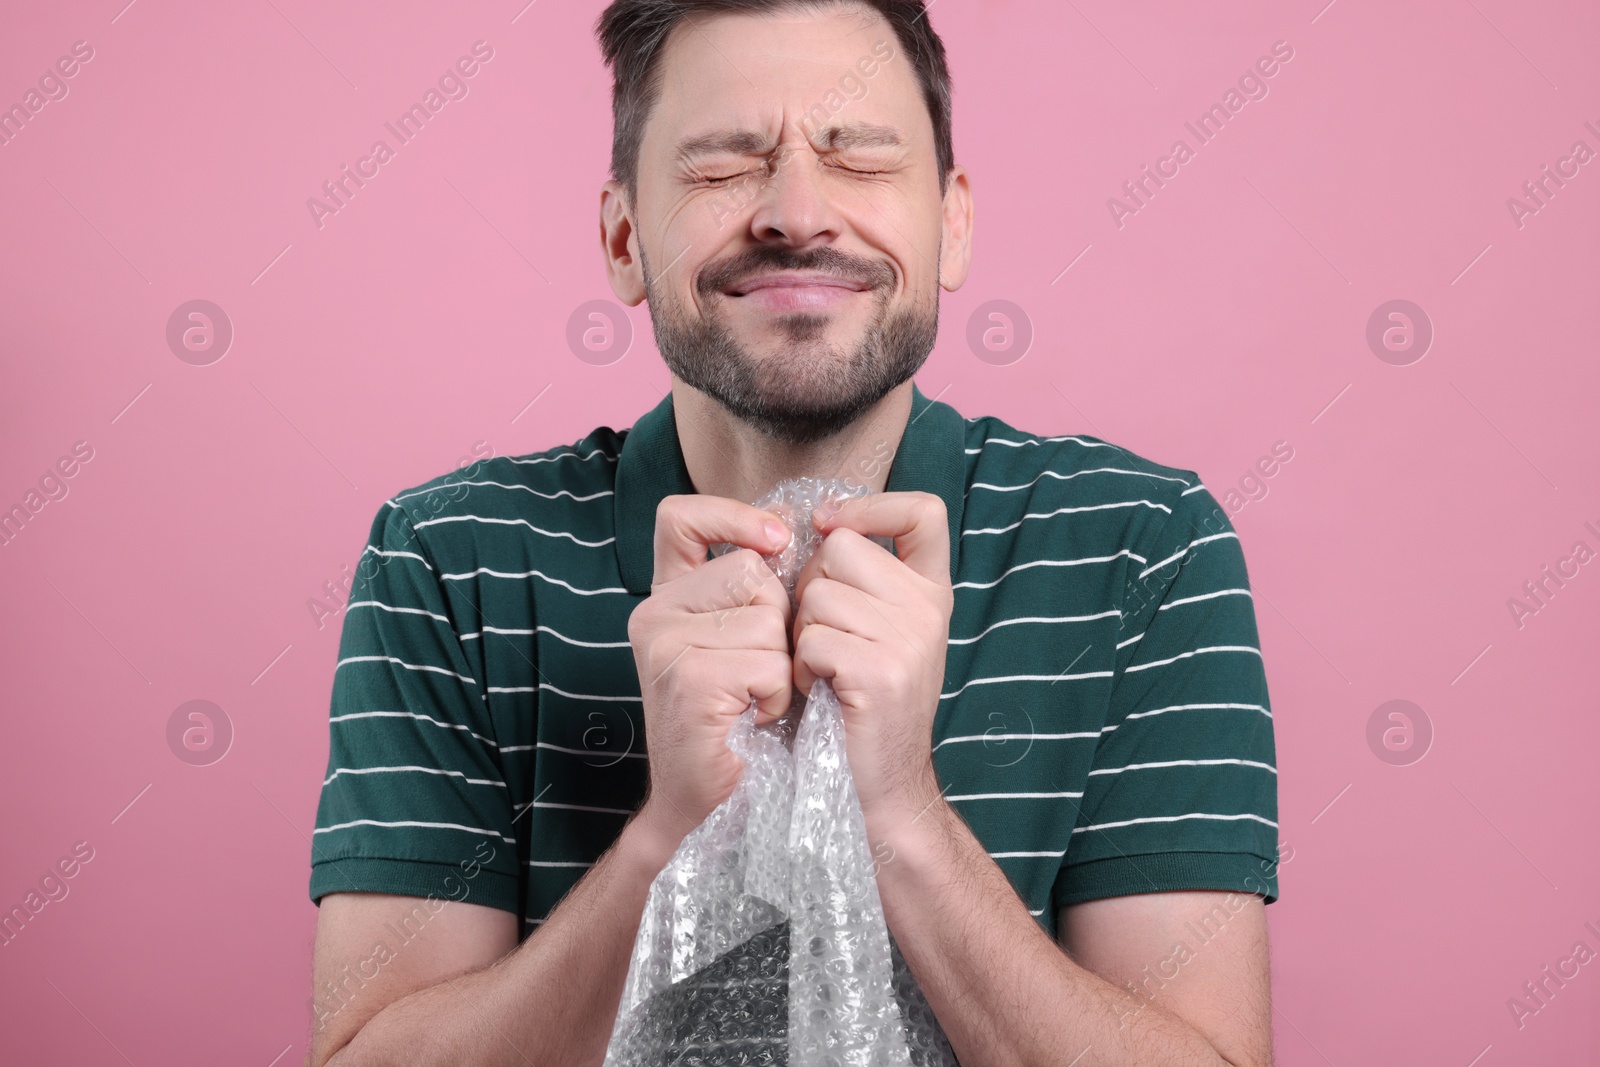 Photo of Man popping bubble wrap on pink background, closeup. Stress relief